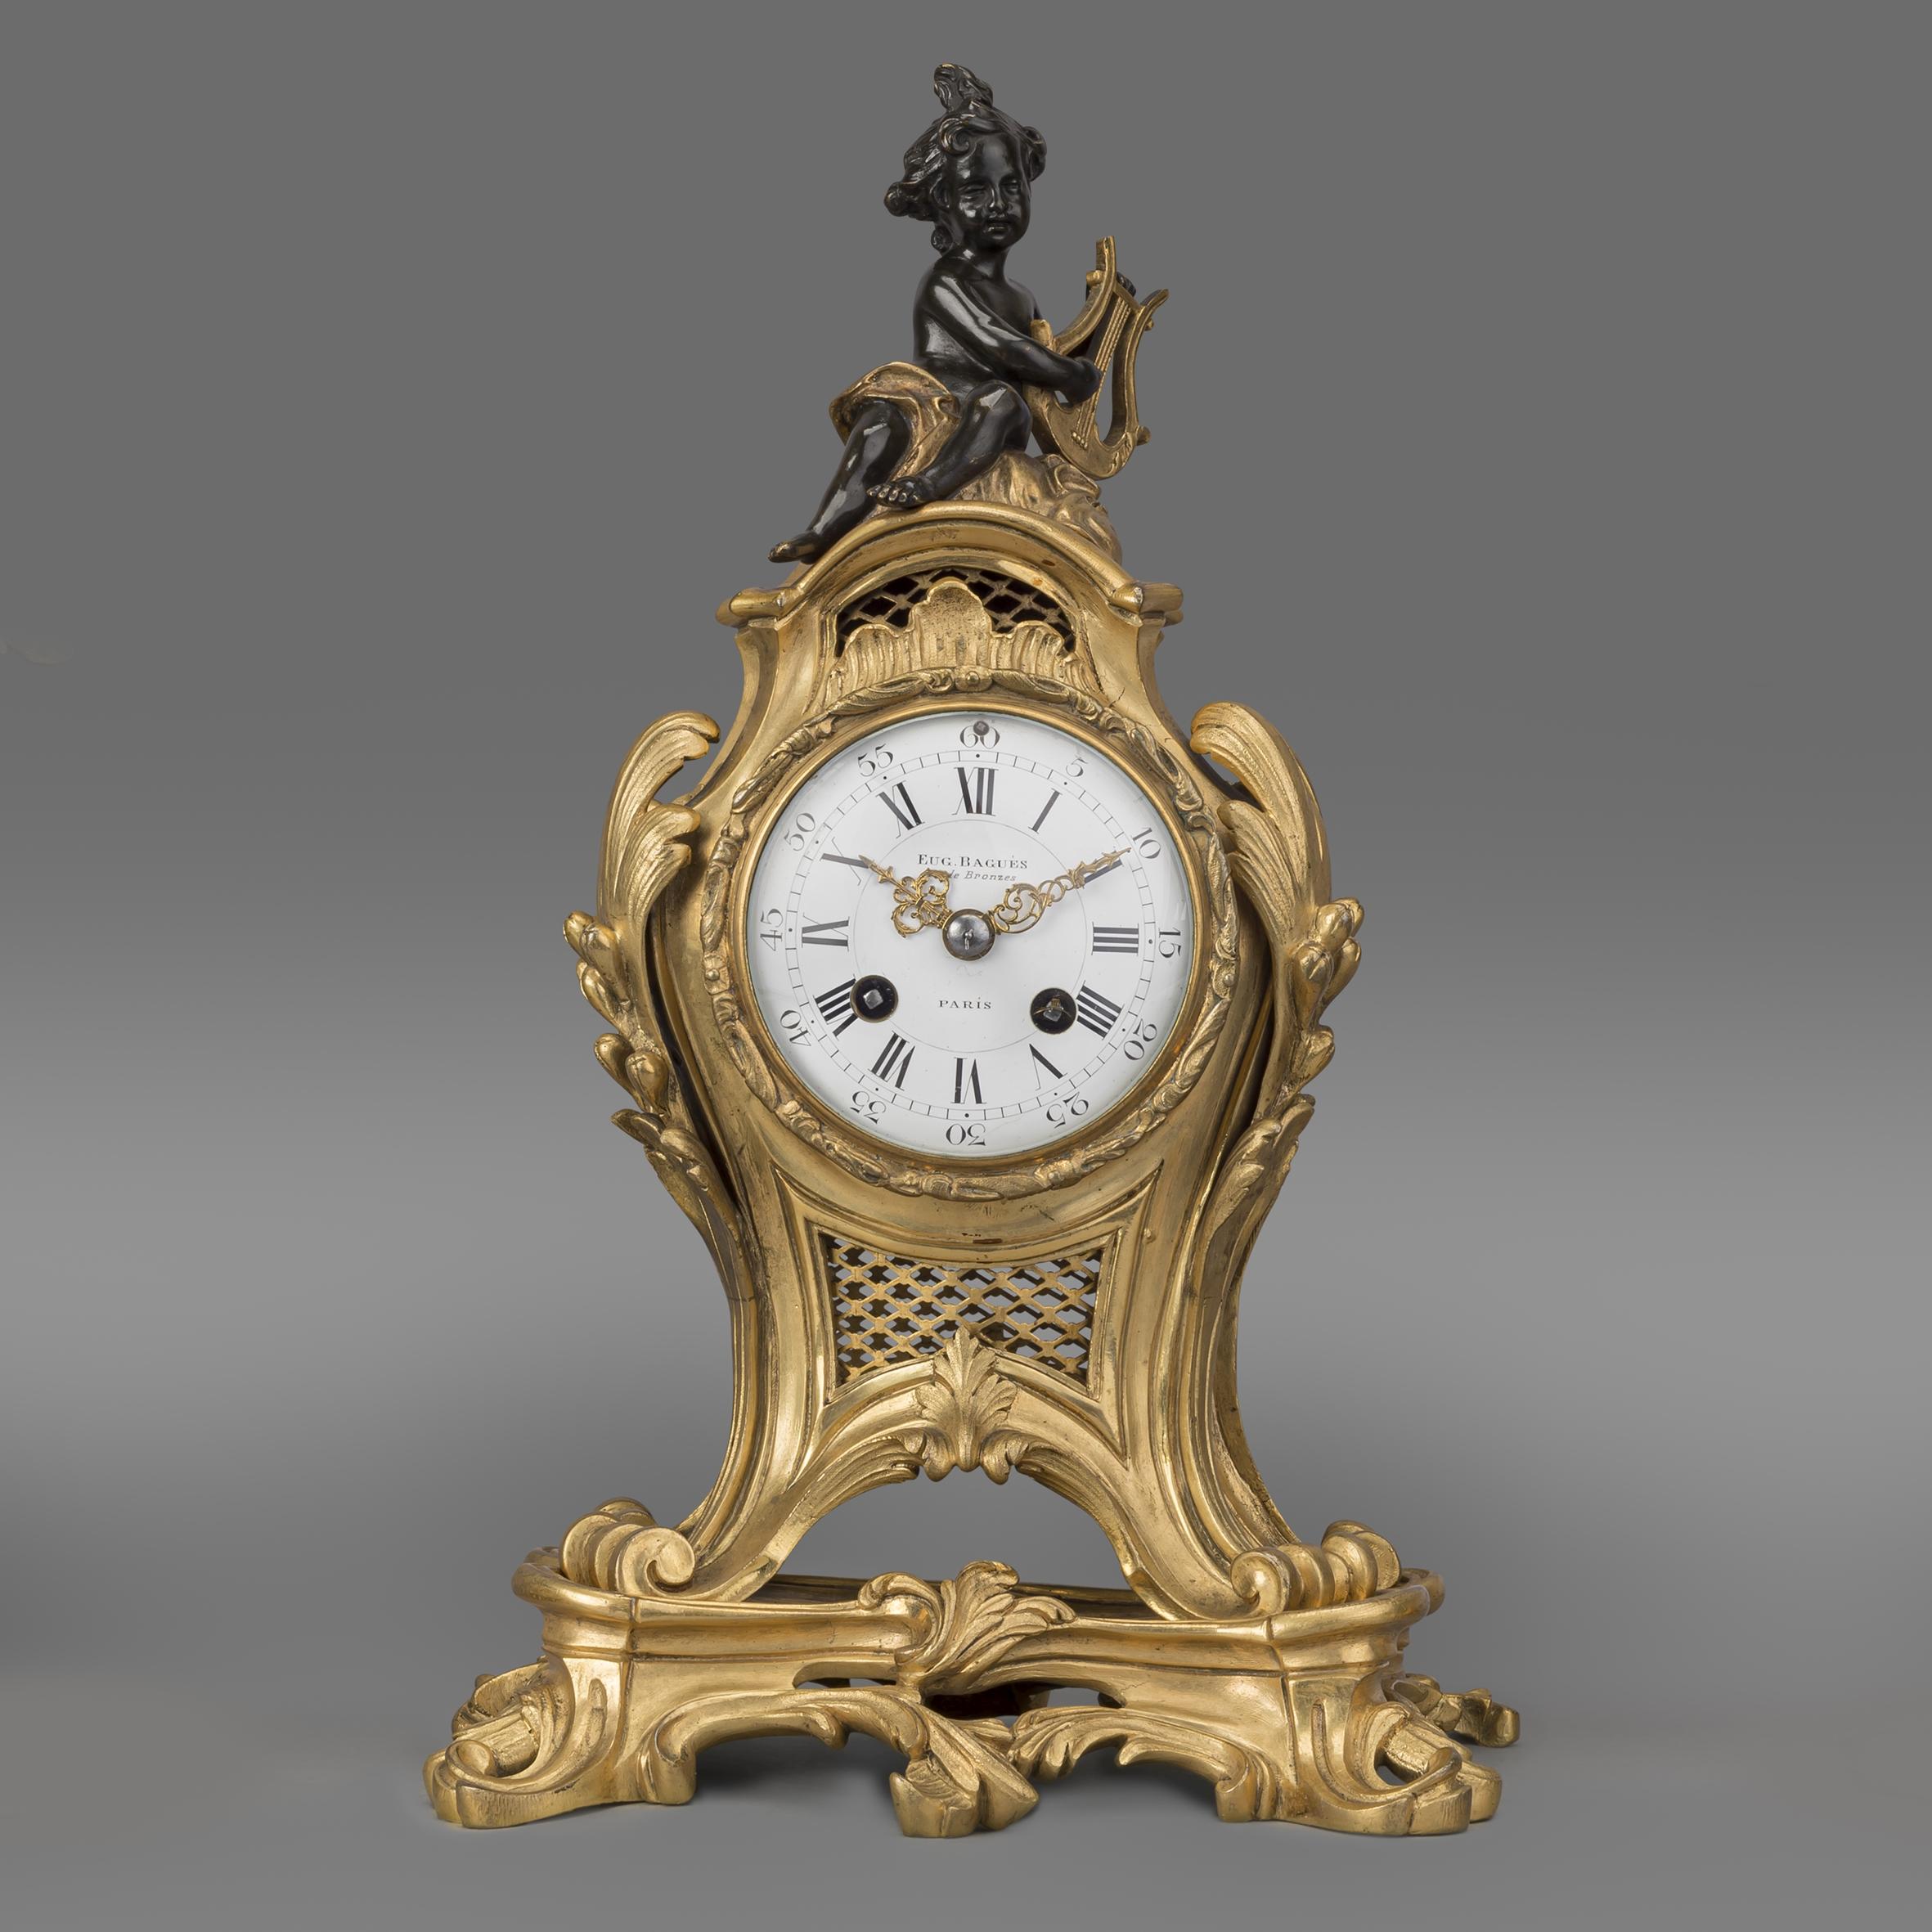 A fine Louis XV style gilt and Patinated bronze figural clock garniture by Maison Baguès. 

This rare example of a clock garniture by Maison Baguès has a twin train eight-day movement striking on a bell. 

The garniture consists of a clock and a